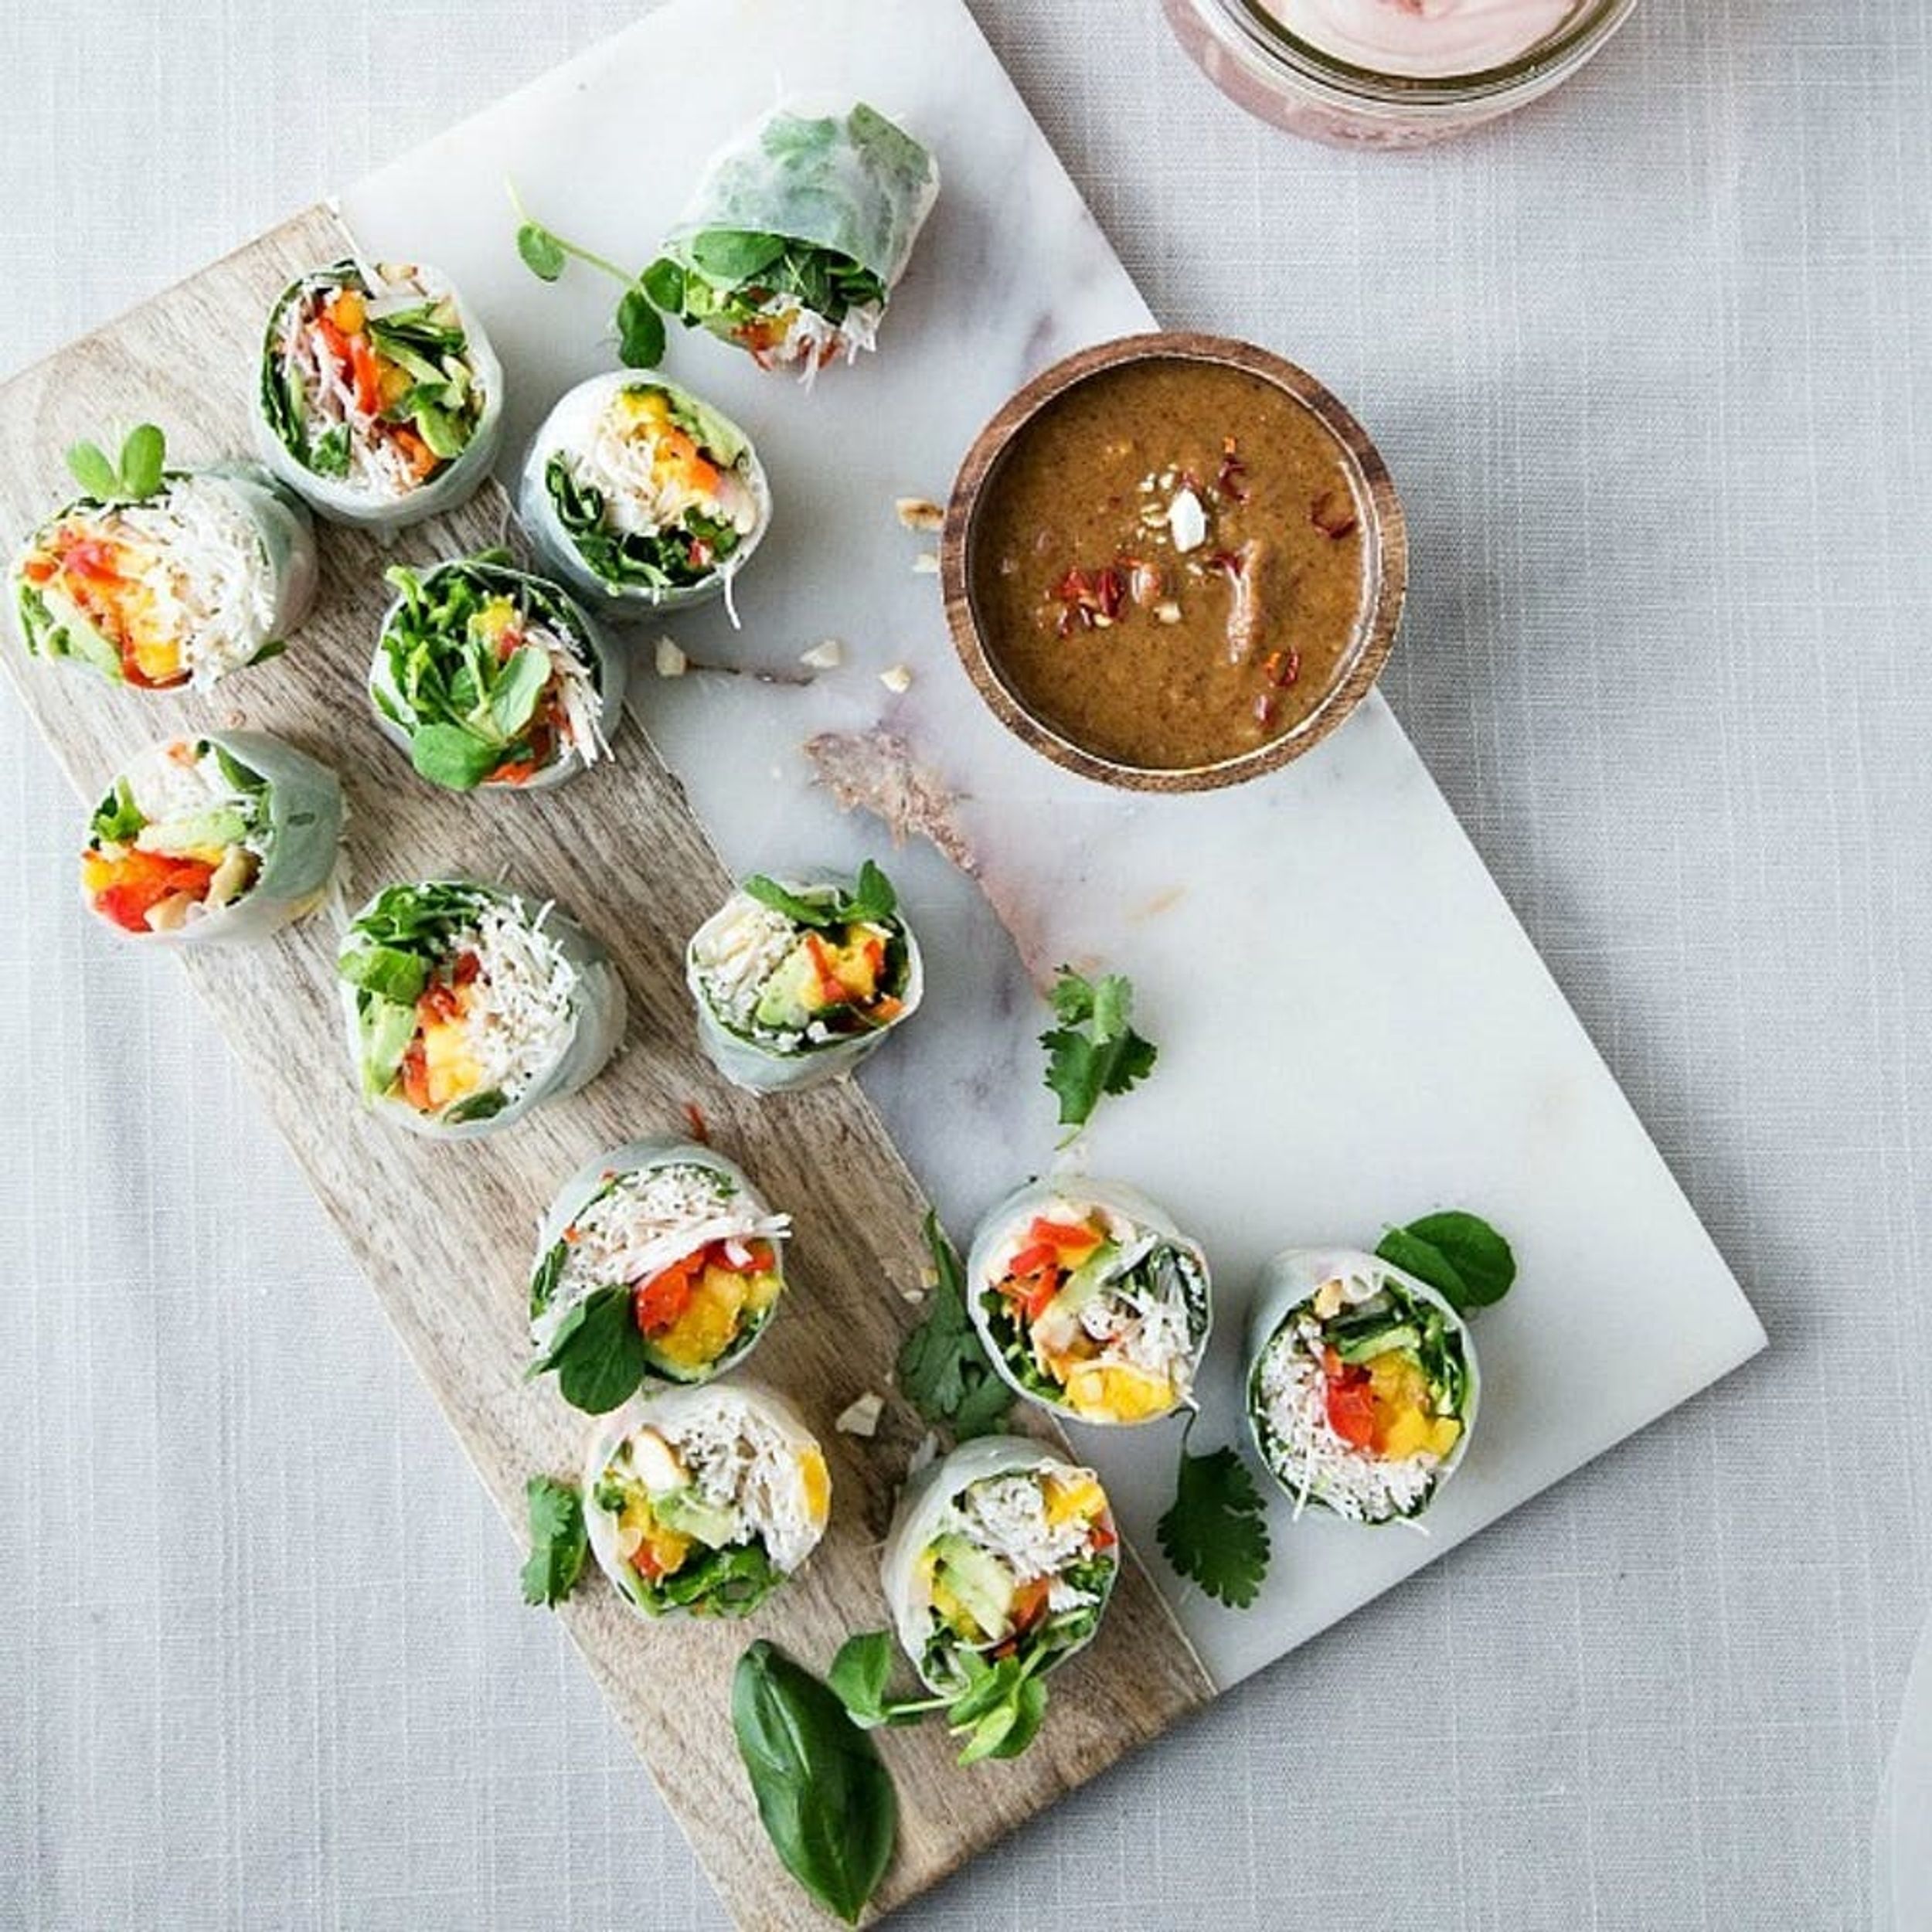 13 Colorful Spring Roll Recipes to Lighten and Brighten Meatless Monday